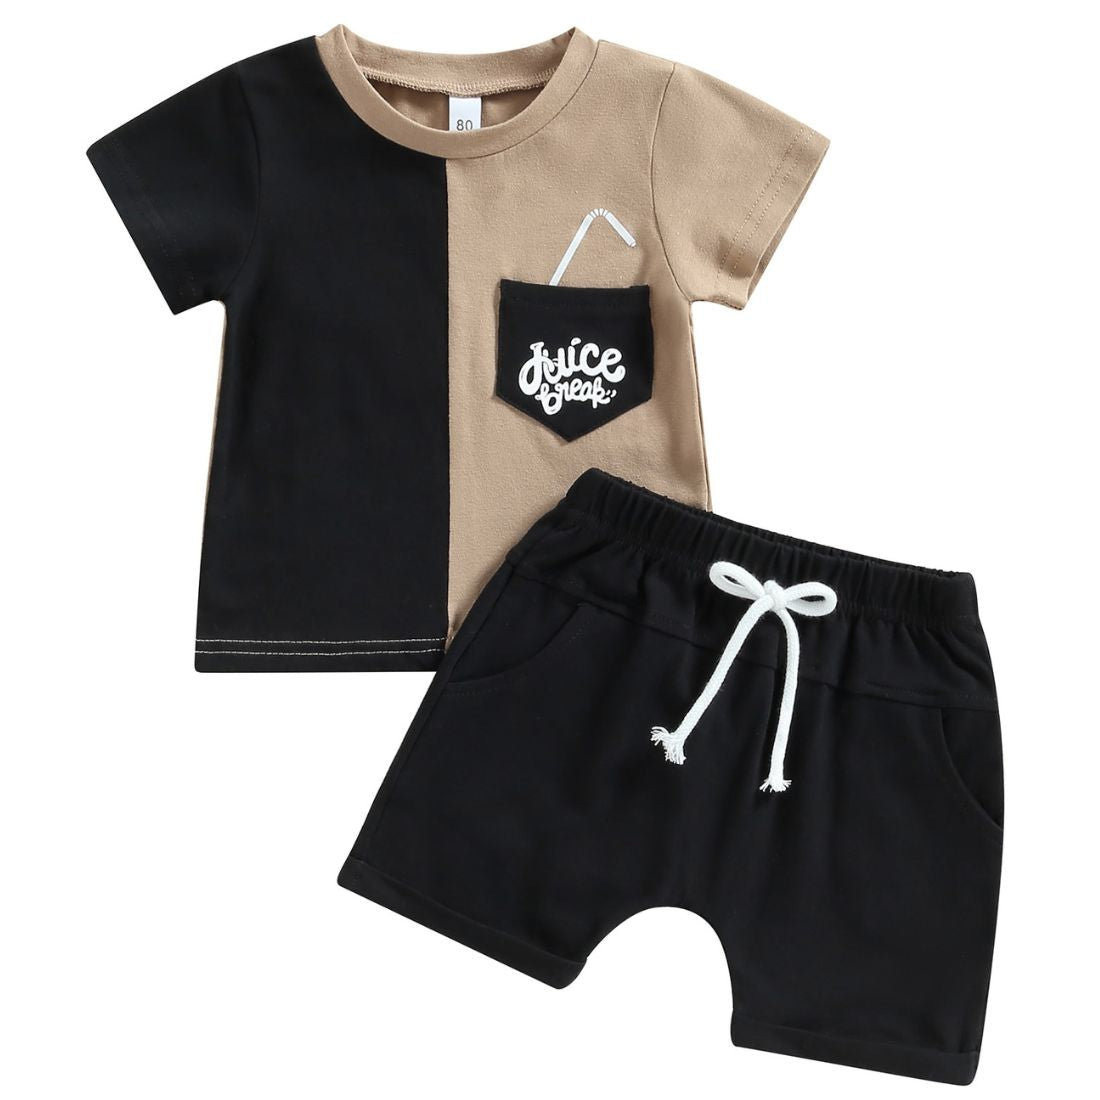 Little Boy Juice Break Tee 2-Piece Clothing Set - My Trendy Youngsters |  Buy Trendy and Afforable Baby and Toddler Clothing Sets @ My Trendy Youngsters - Dress your little man in Style @ My Trendy Youngsters 